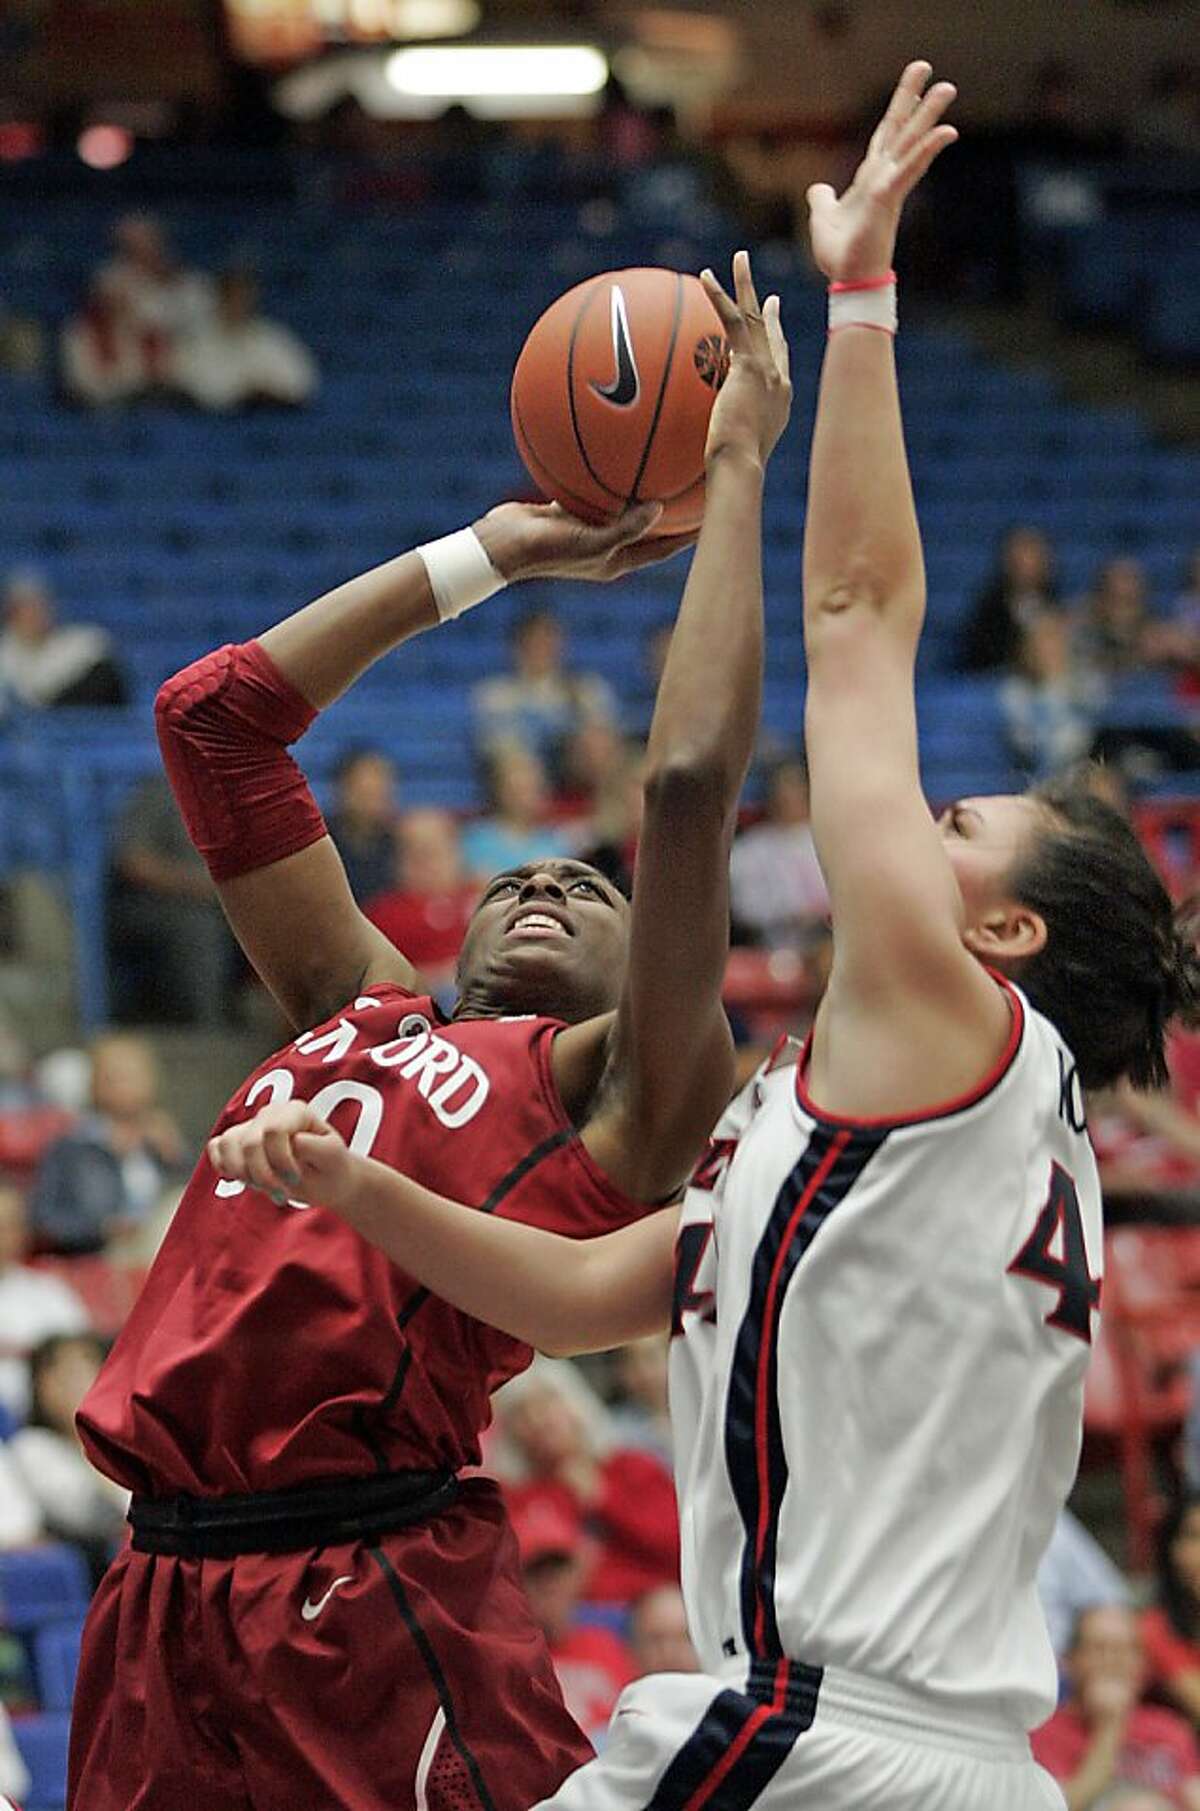 Stanford's Nnemkadi Ogwumike (30) shoots for two over the defense of Arizona's Aley Rohde (44) during the second half of an NCAA college basketball game at McKale Center in Tucson, Ariz., Saturday, Feb. 4, 2012. Stanford won 91-51. (AP Photo/John Miller)